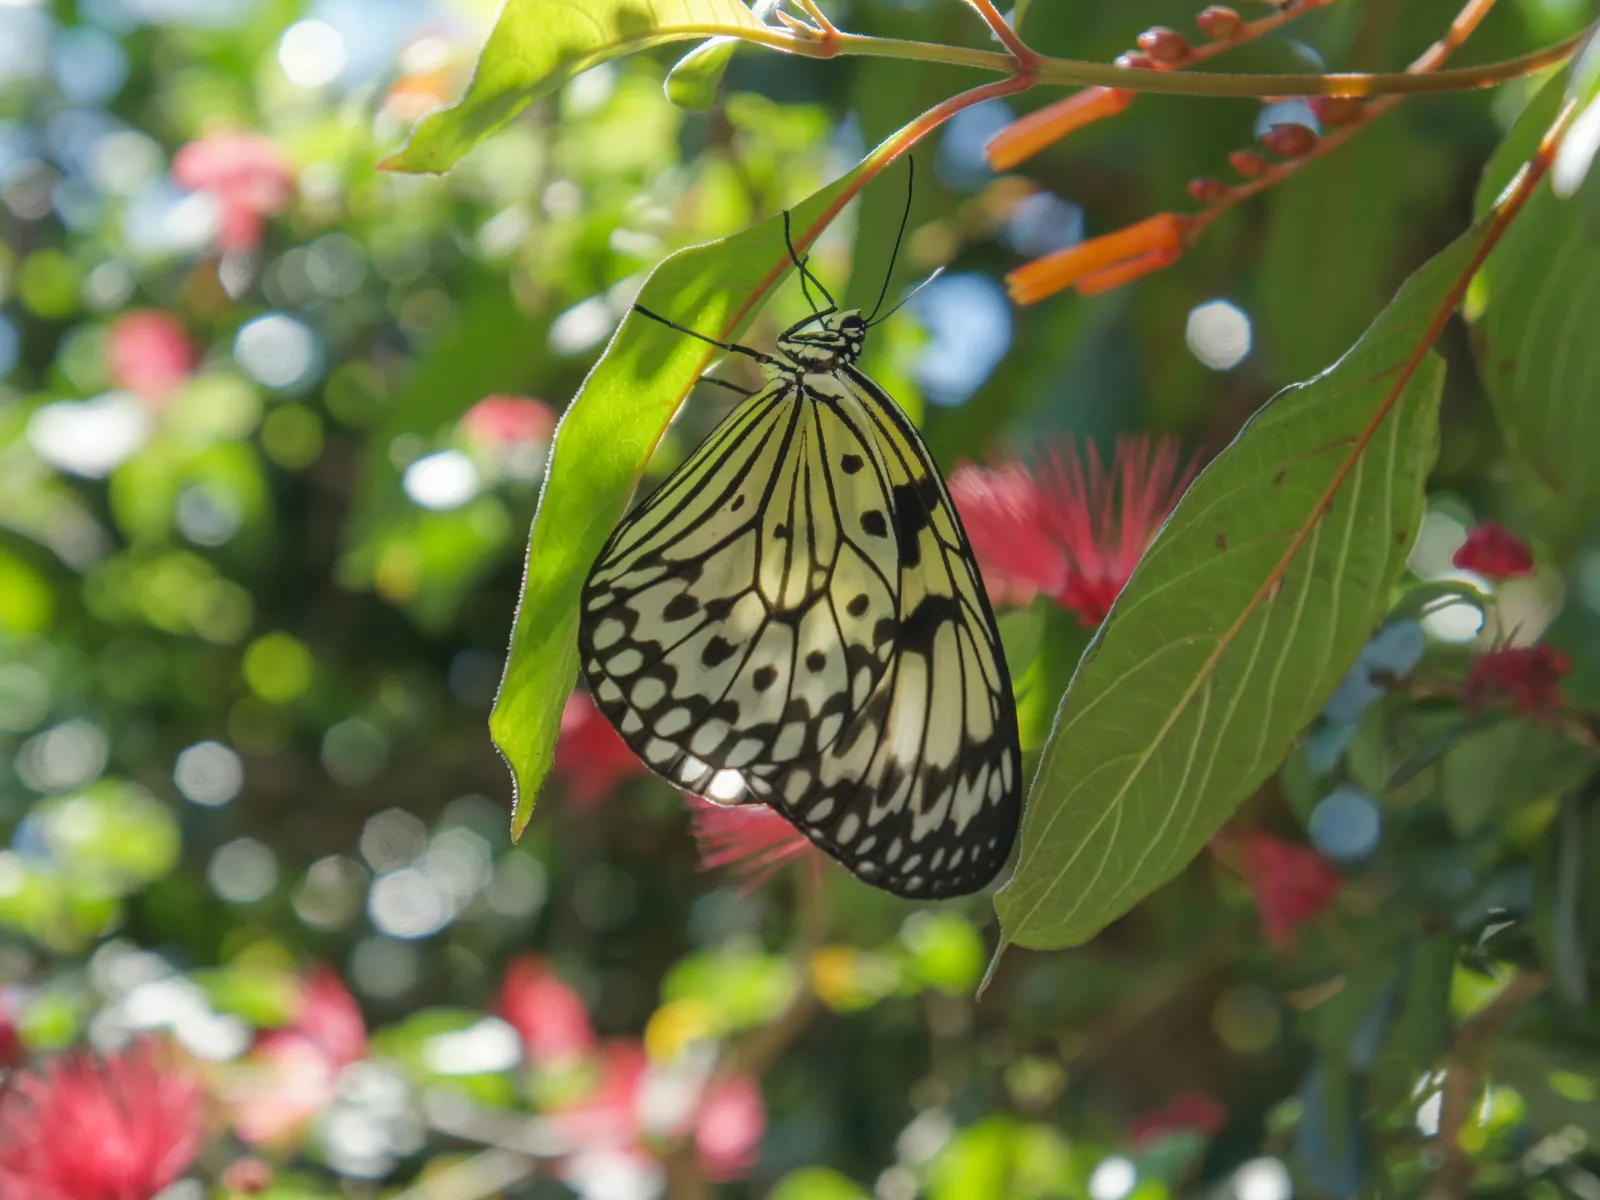 A tropical buttery nestled under a green leaf at Butterfly World, one of the best things to do in Fort Lauderdale